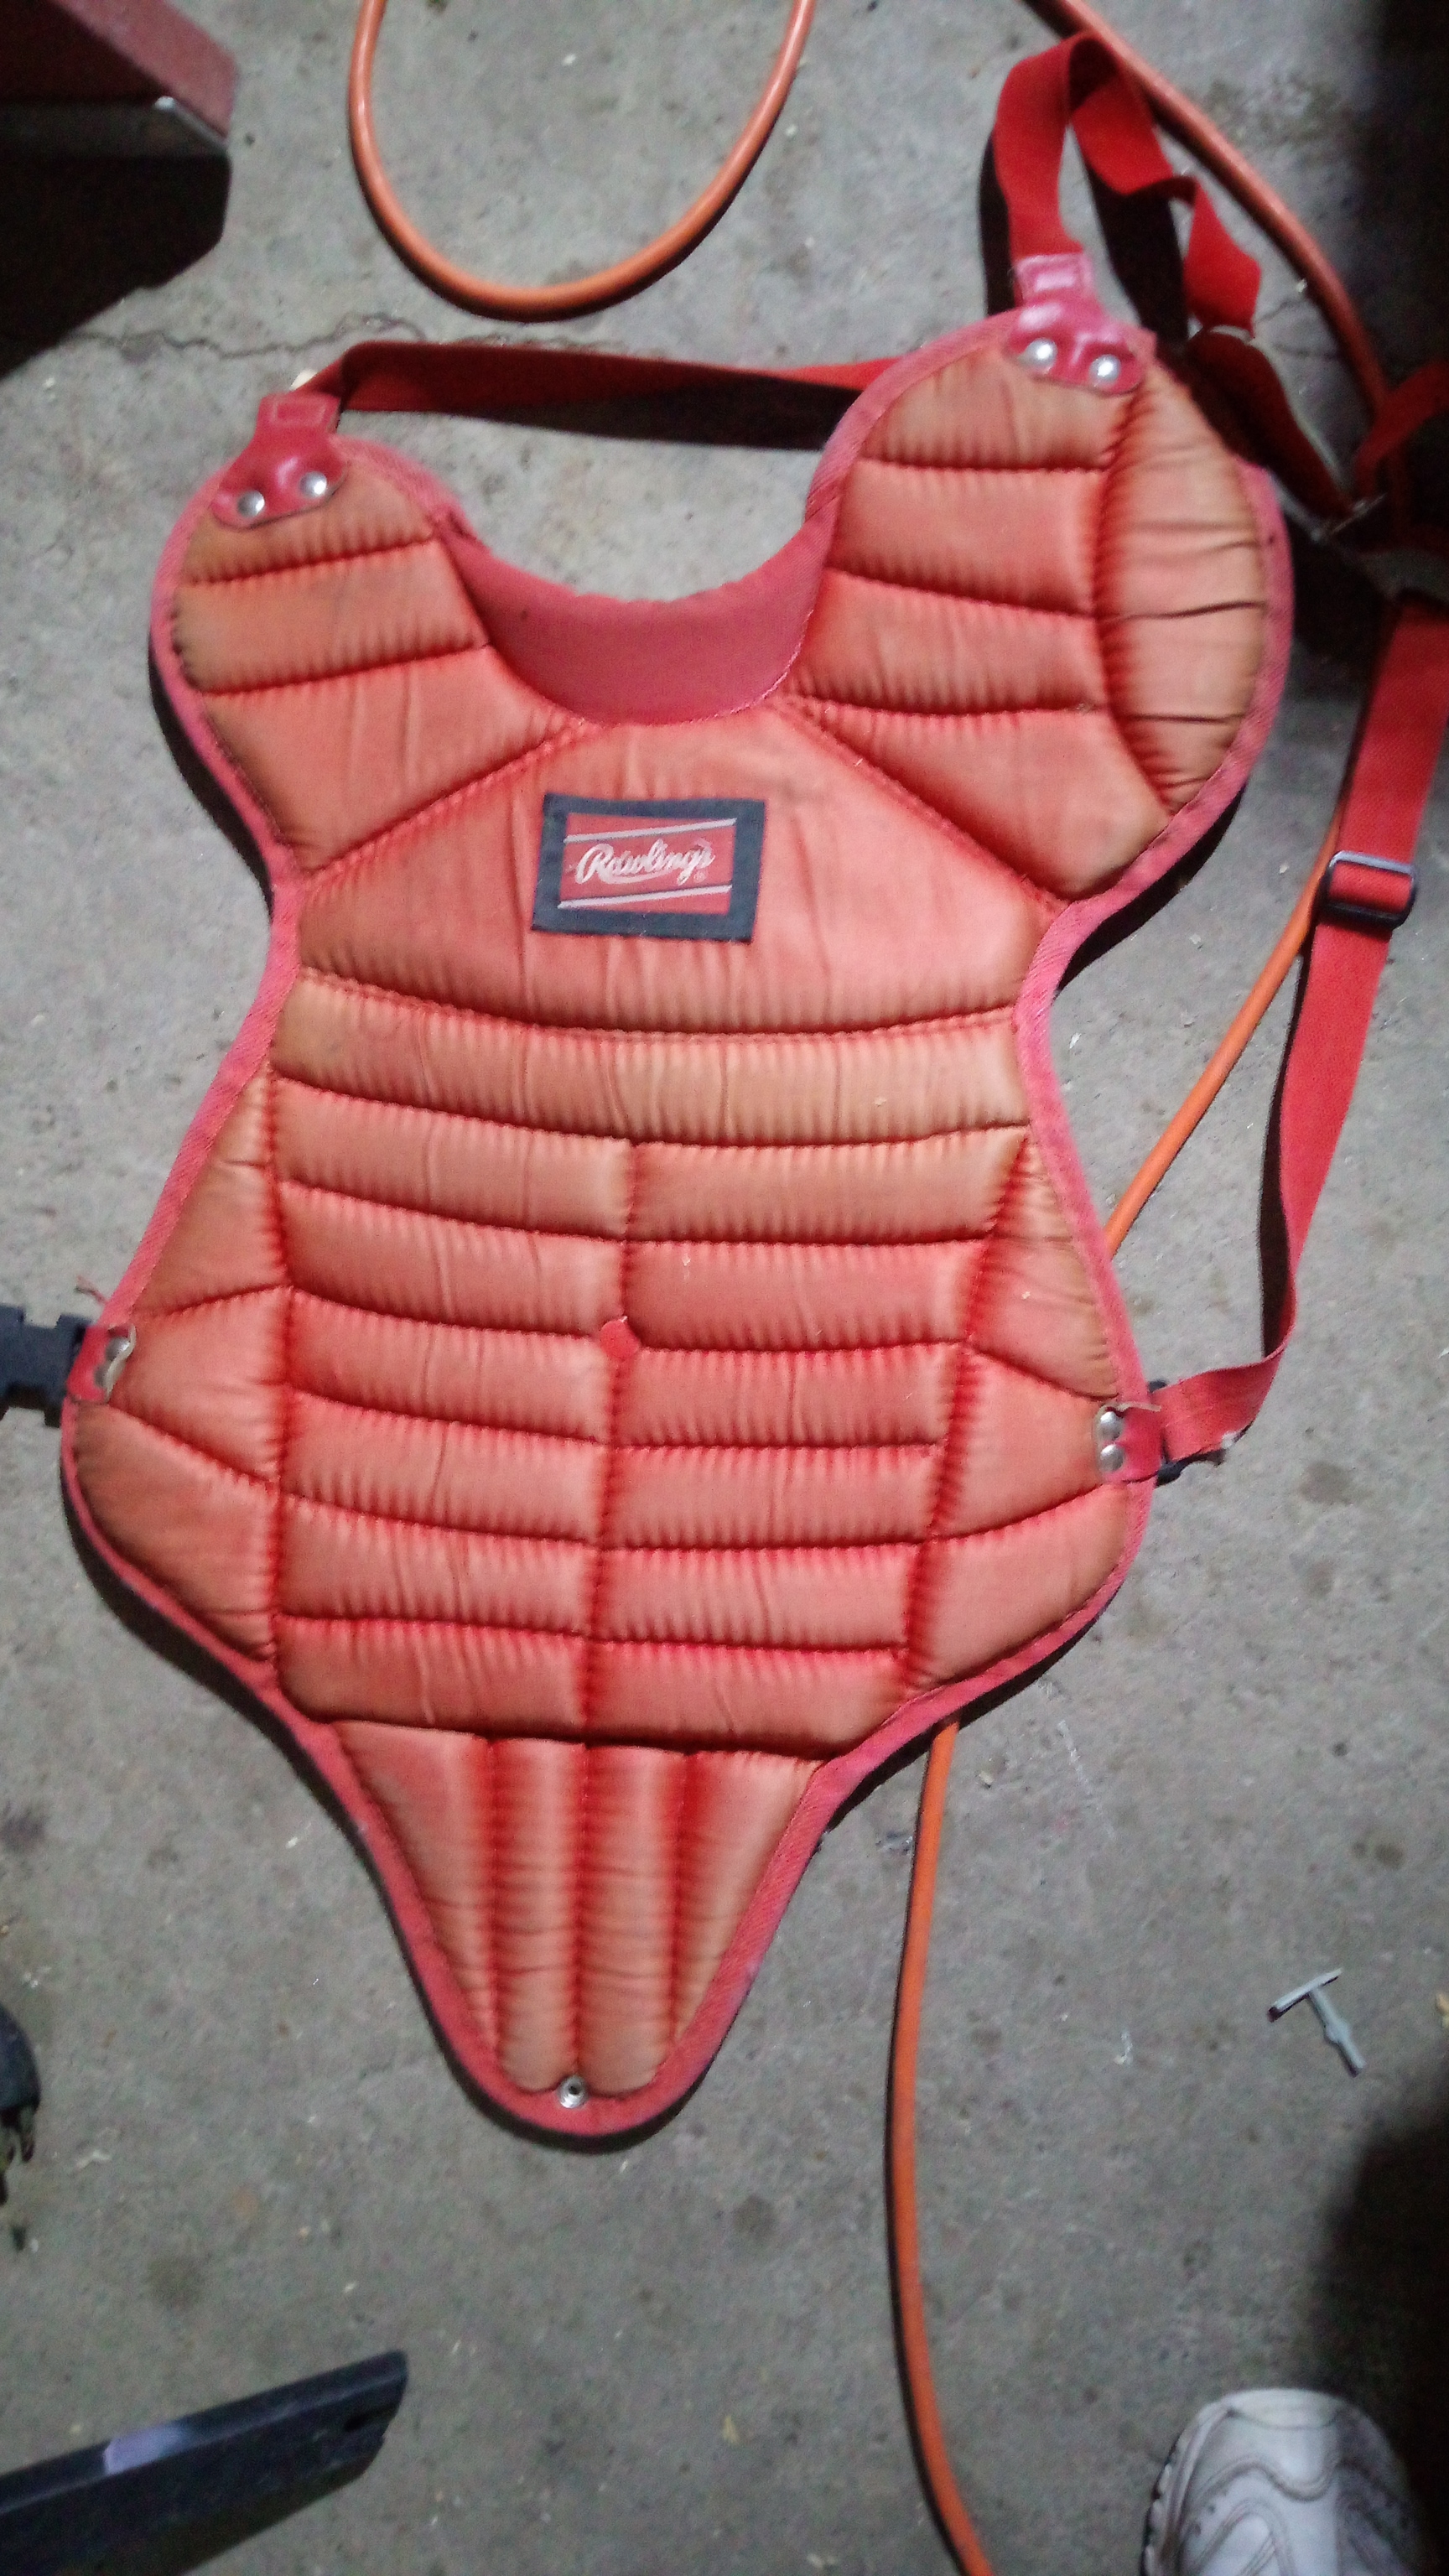 Used Rawlings LLBP-1 Catcher's Chest Protector